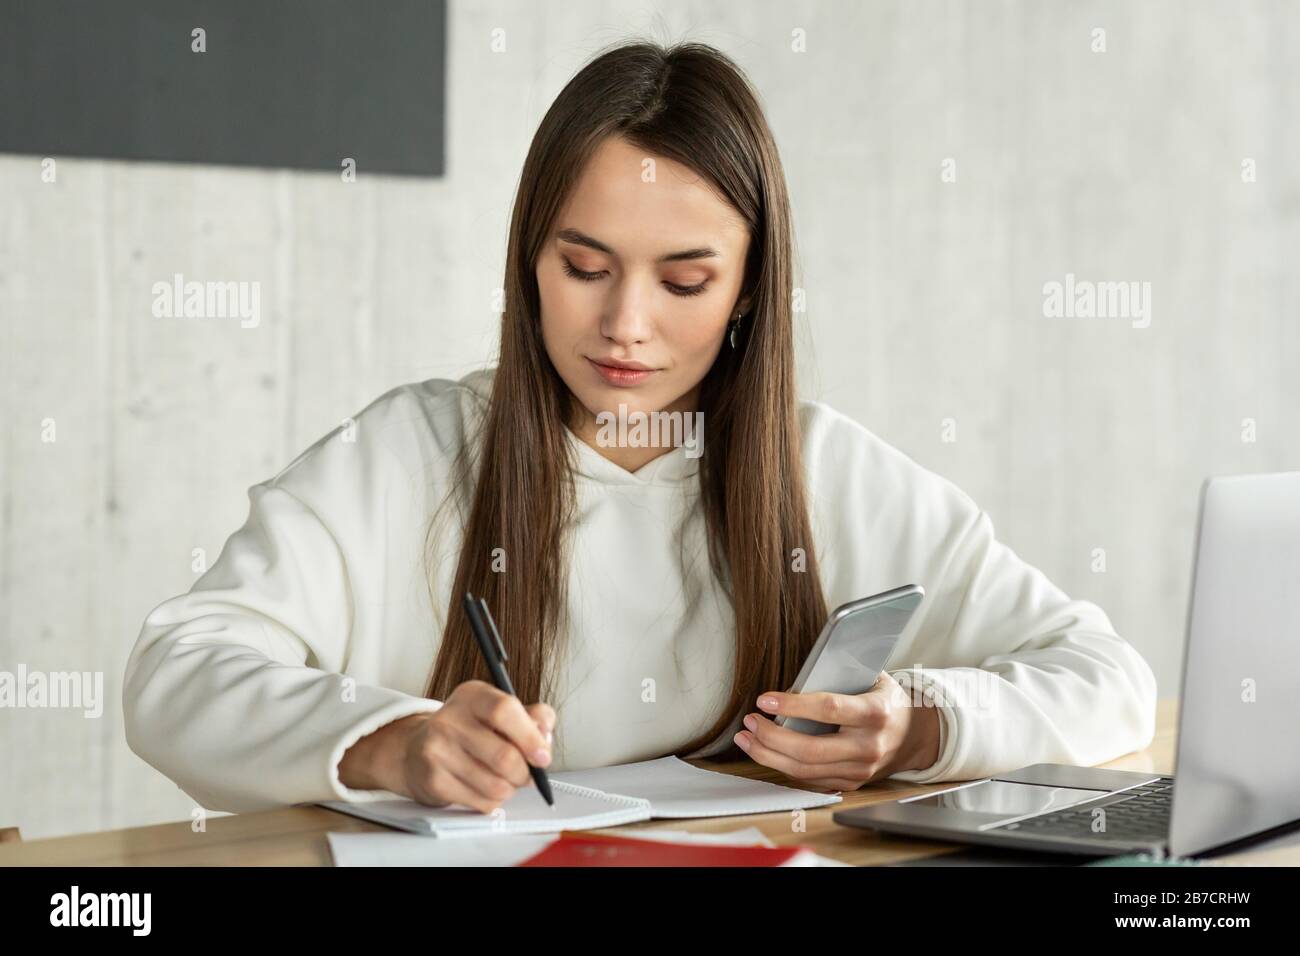 Young woman freelancer makes notes at workplace Stock Photo